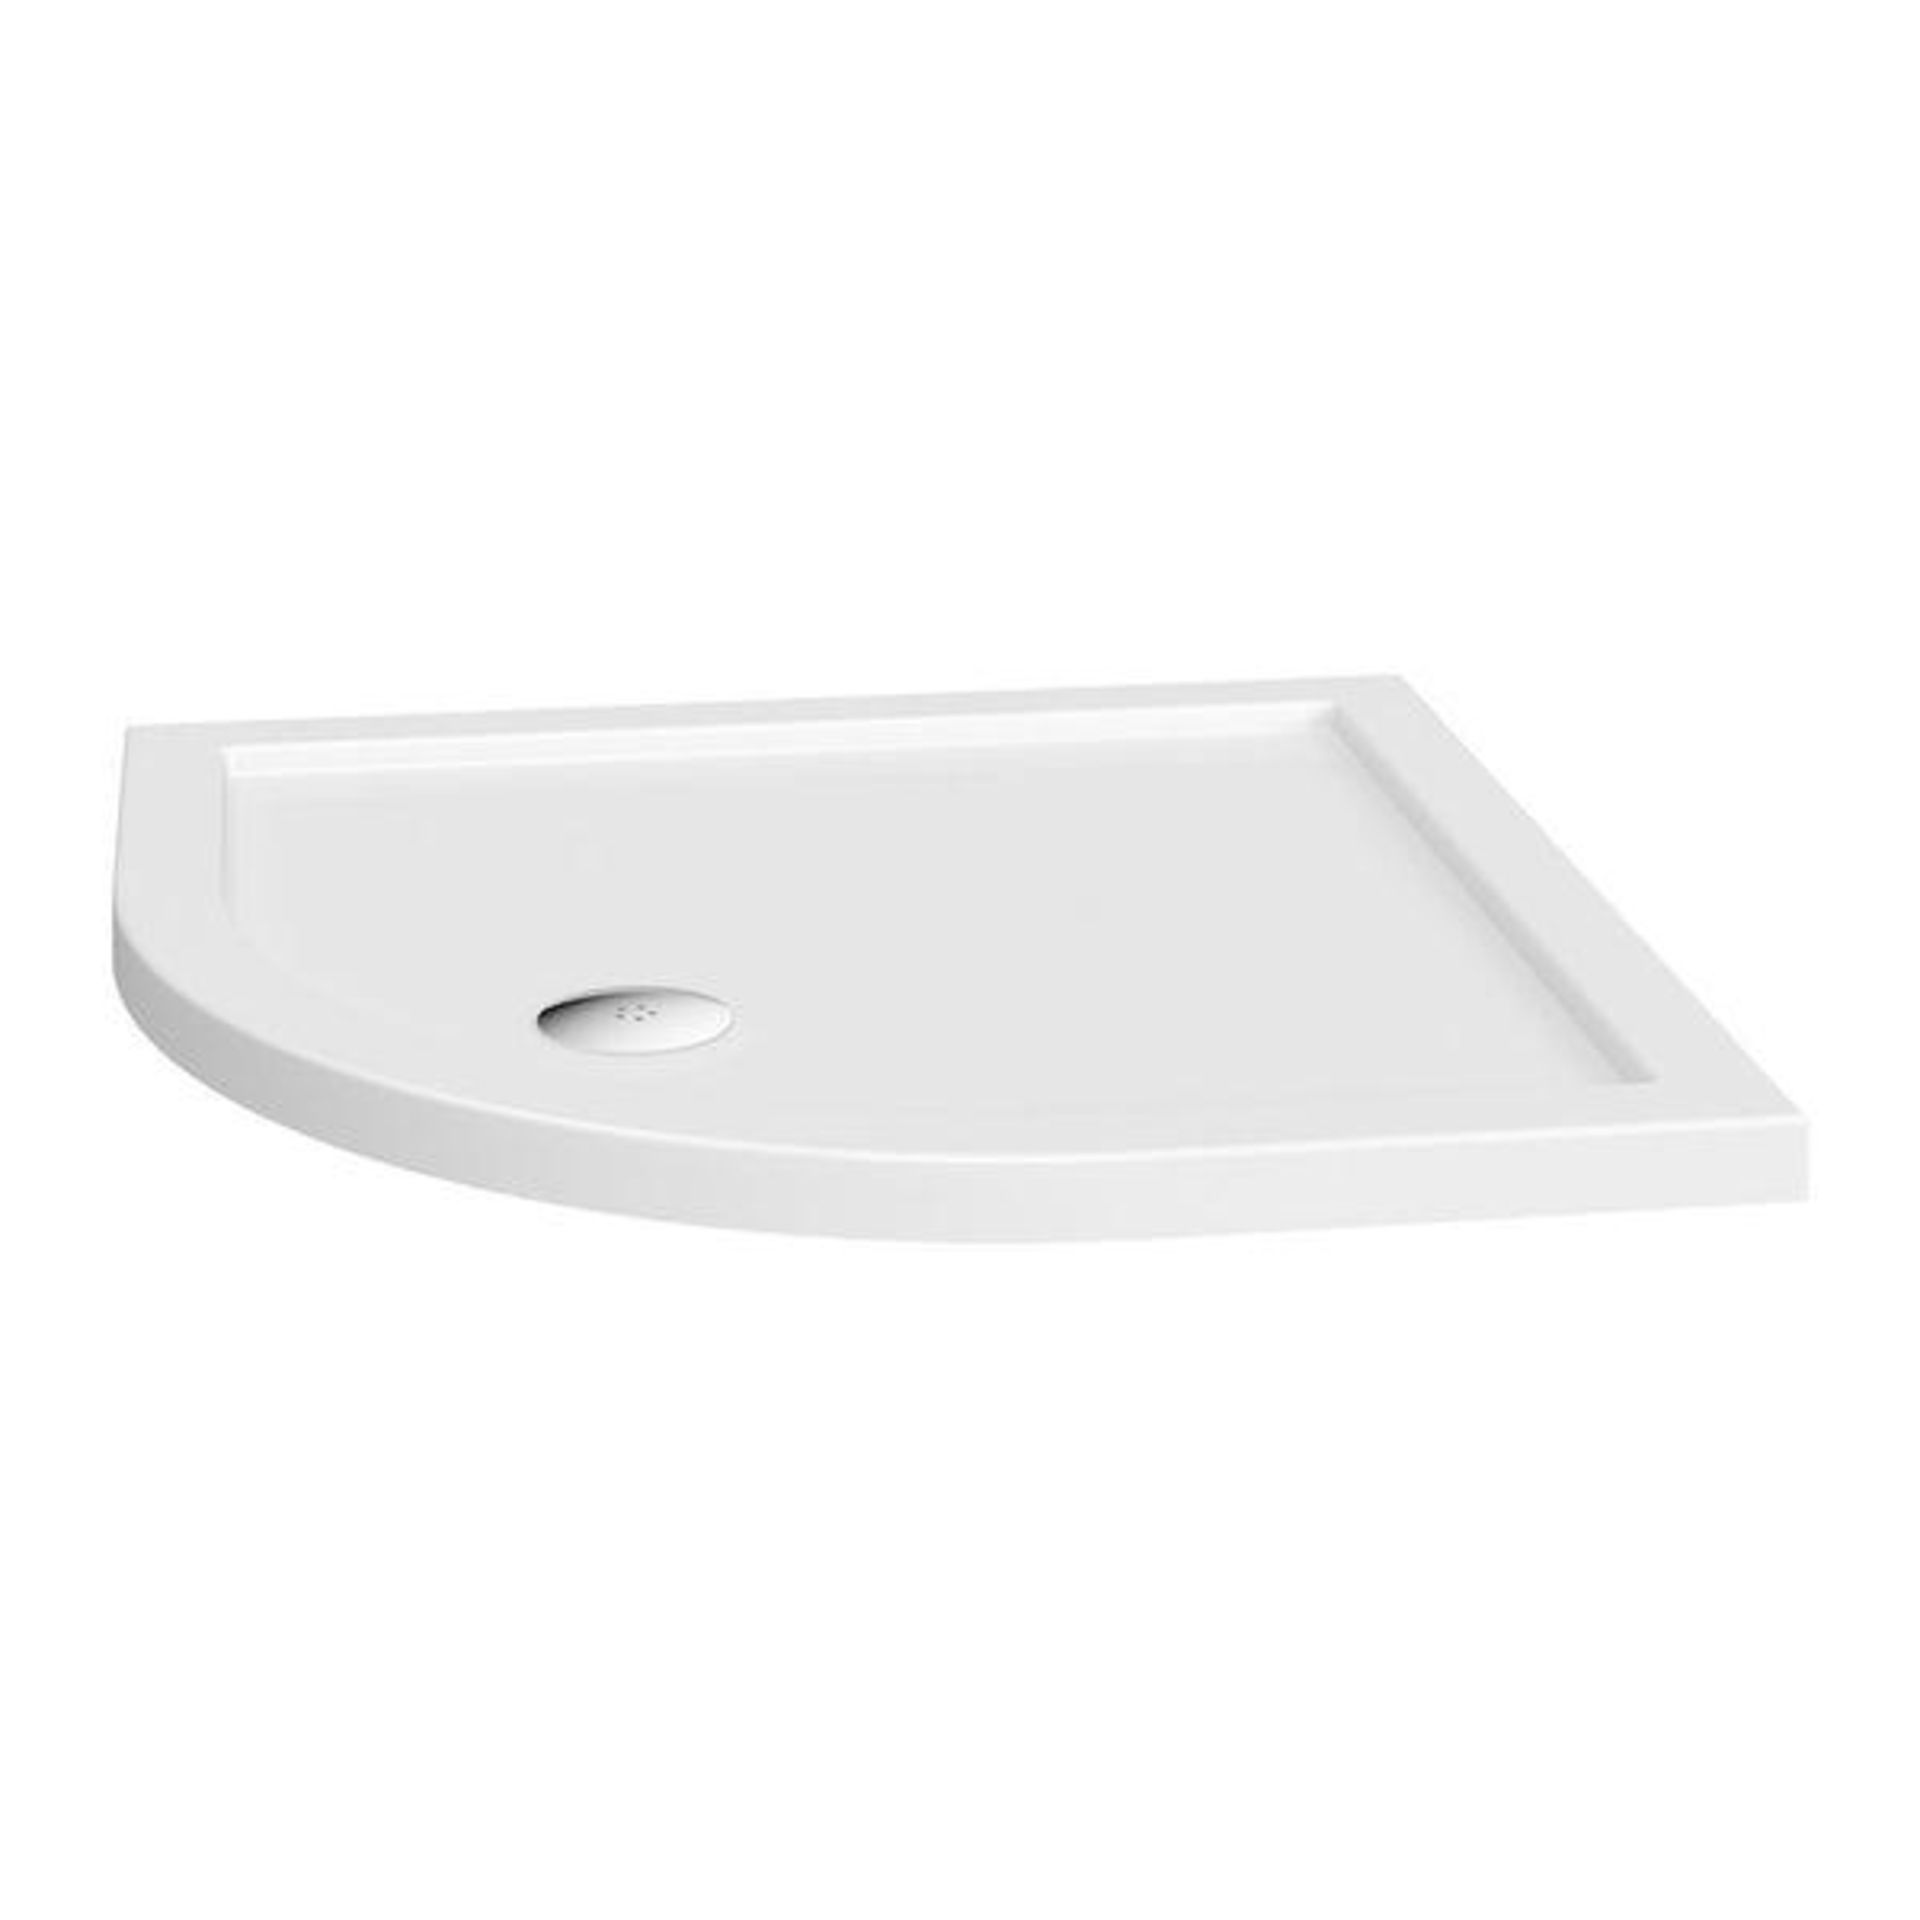 1 x Orchard Quad Slimline Stone Shower Tray - New / Unused Stock - Dimensions: 900 x 900 x 40mm - CL - Image 4 of 4